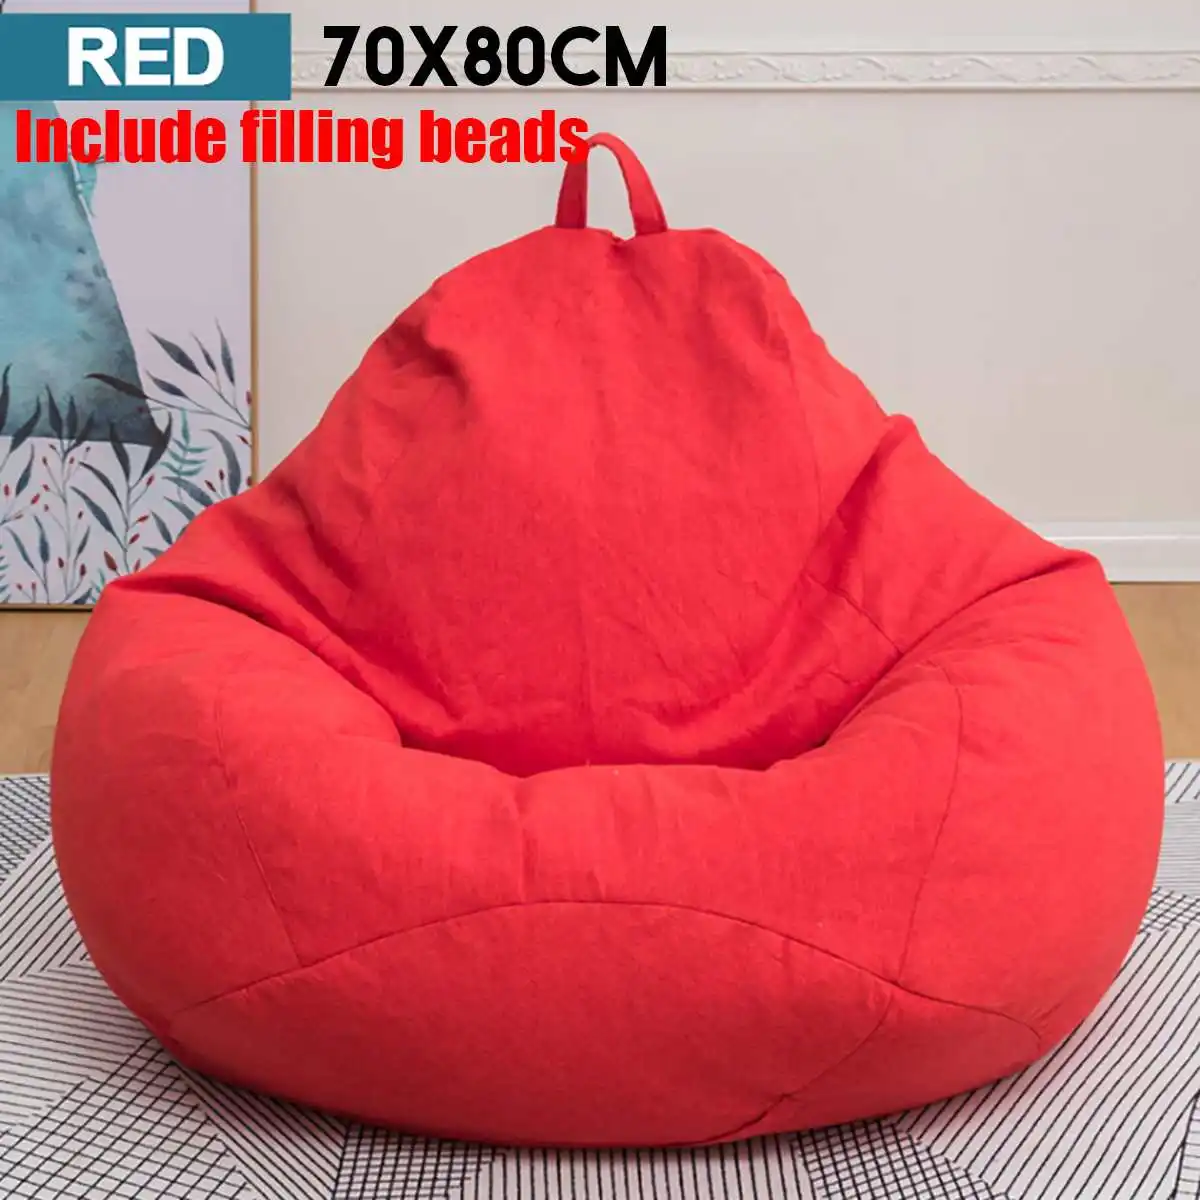 70x80cm Kids Bean Bag Children Couch Lazy Chair Single Sofa Child Lounger With Filling Eps Beads Home Living Room Furniture Sofa Bean Bag Sofas Aliexpress